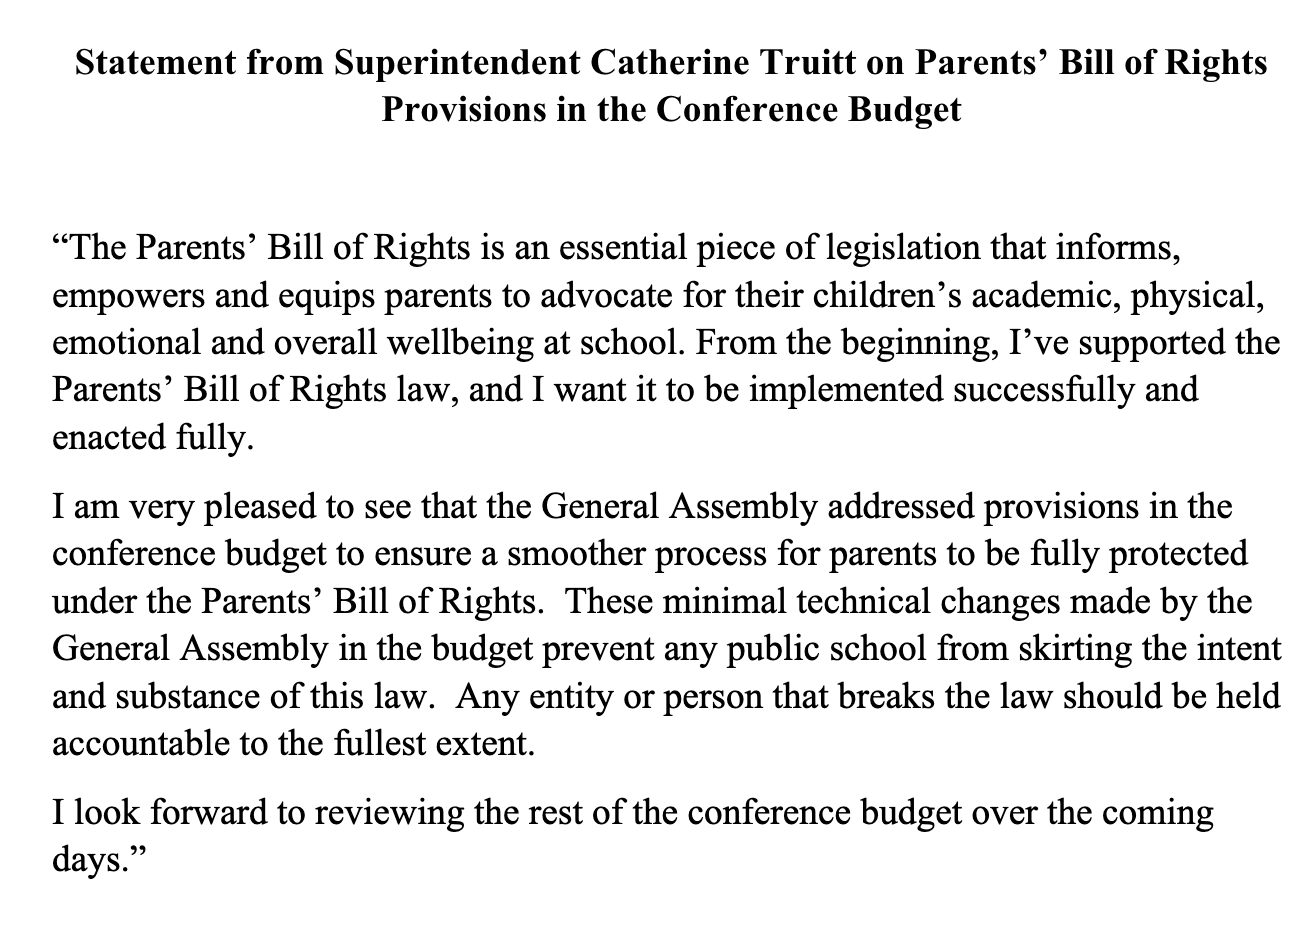 NC Superintendent Catherine Truitt statement on Parent Bill of Rights Provisions